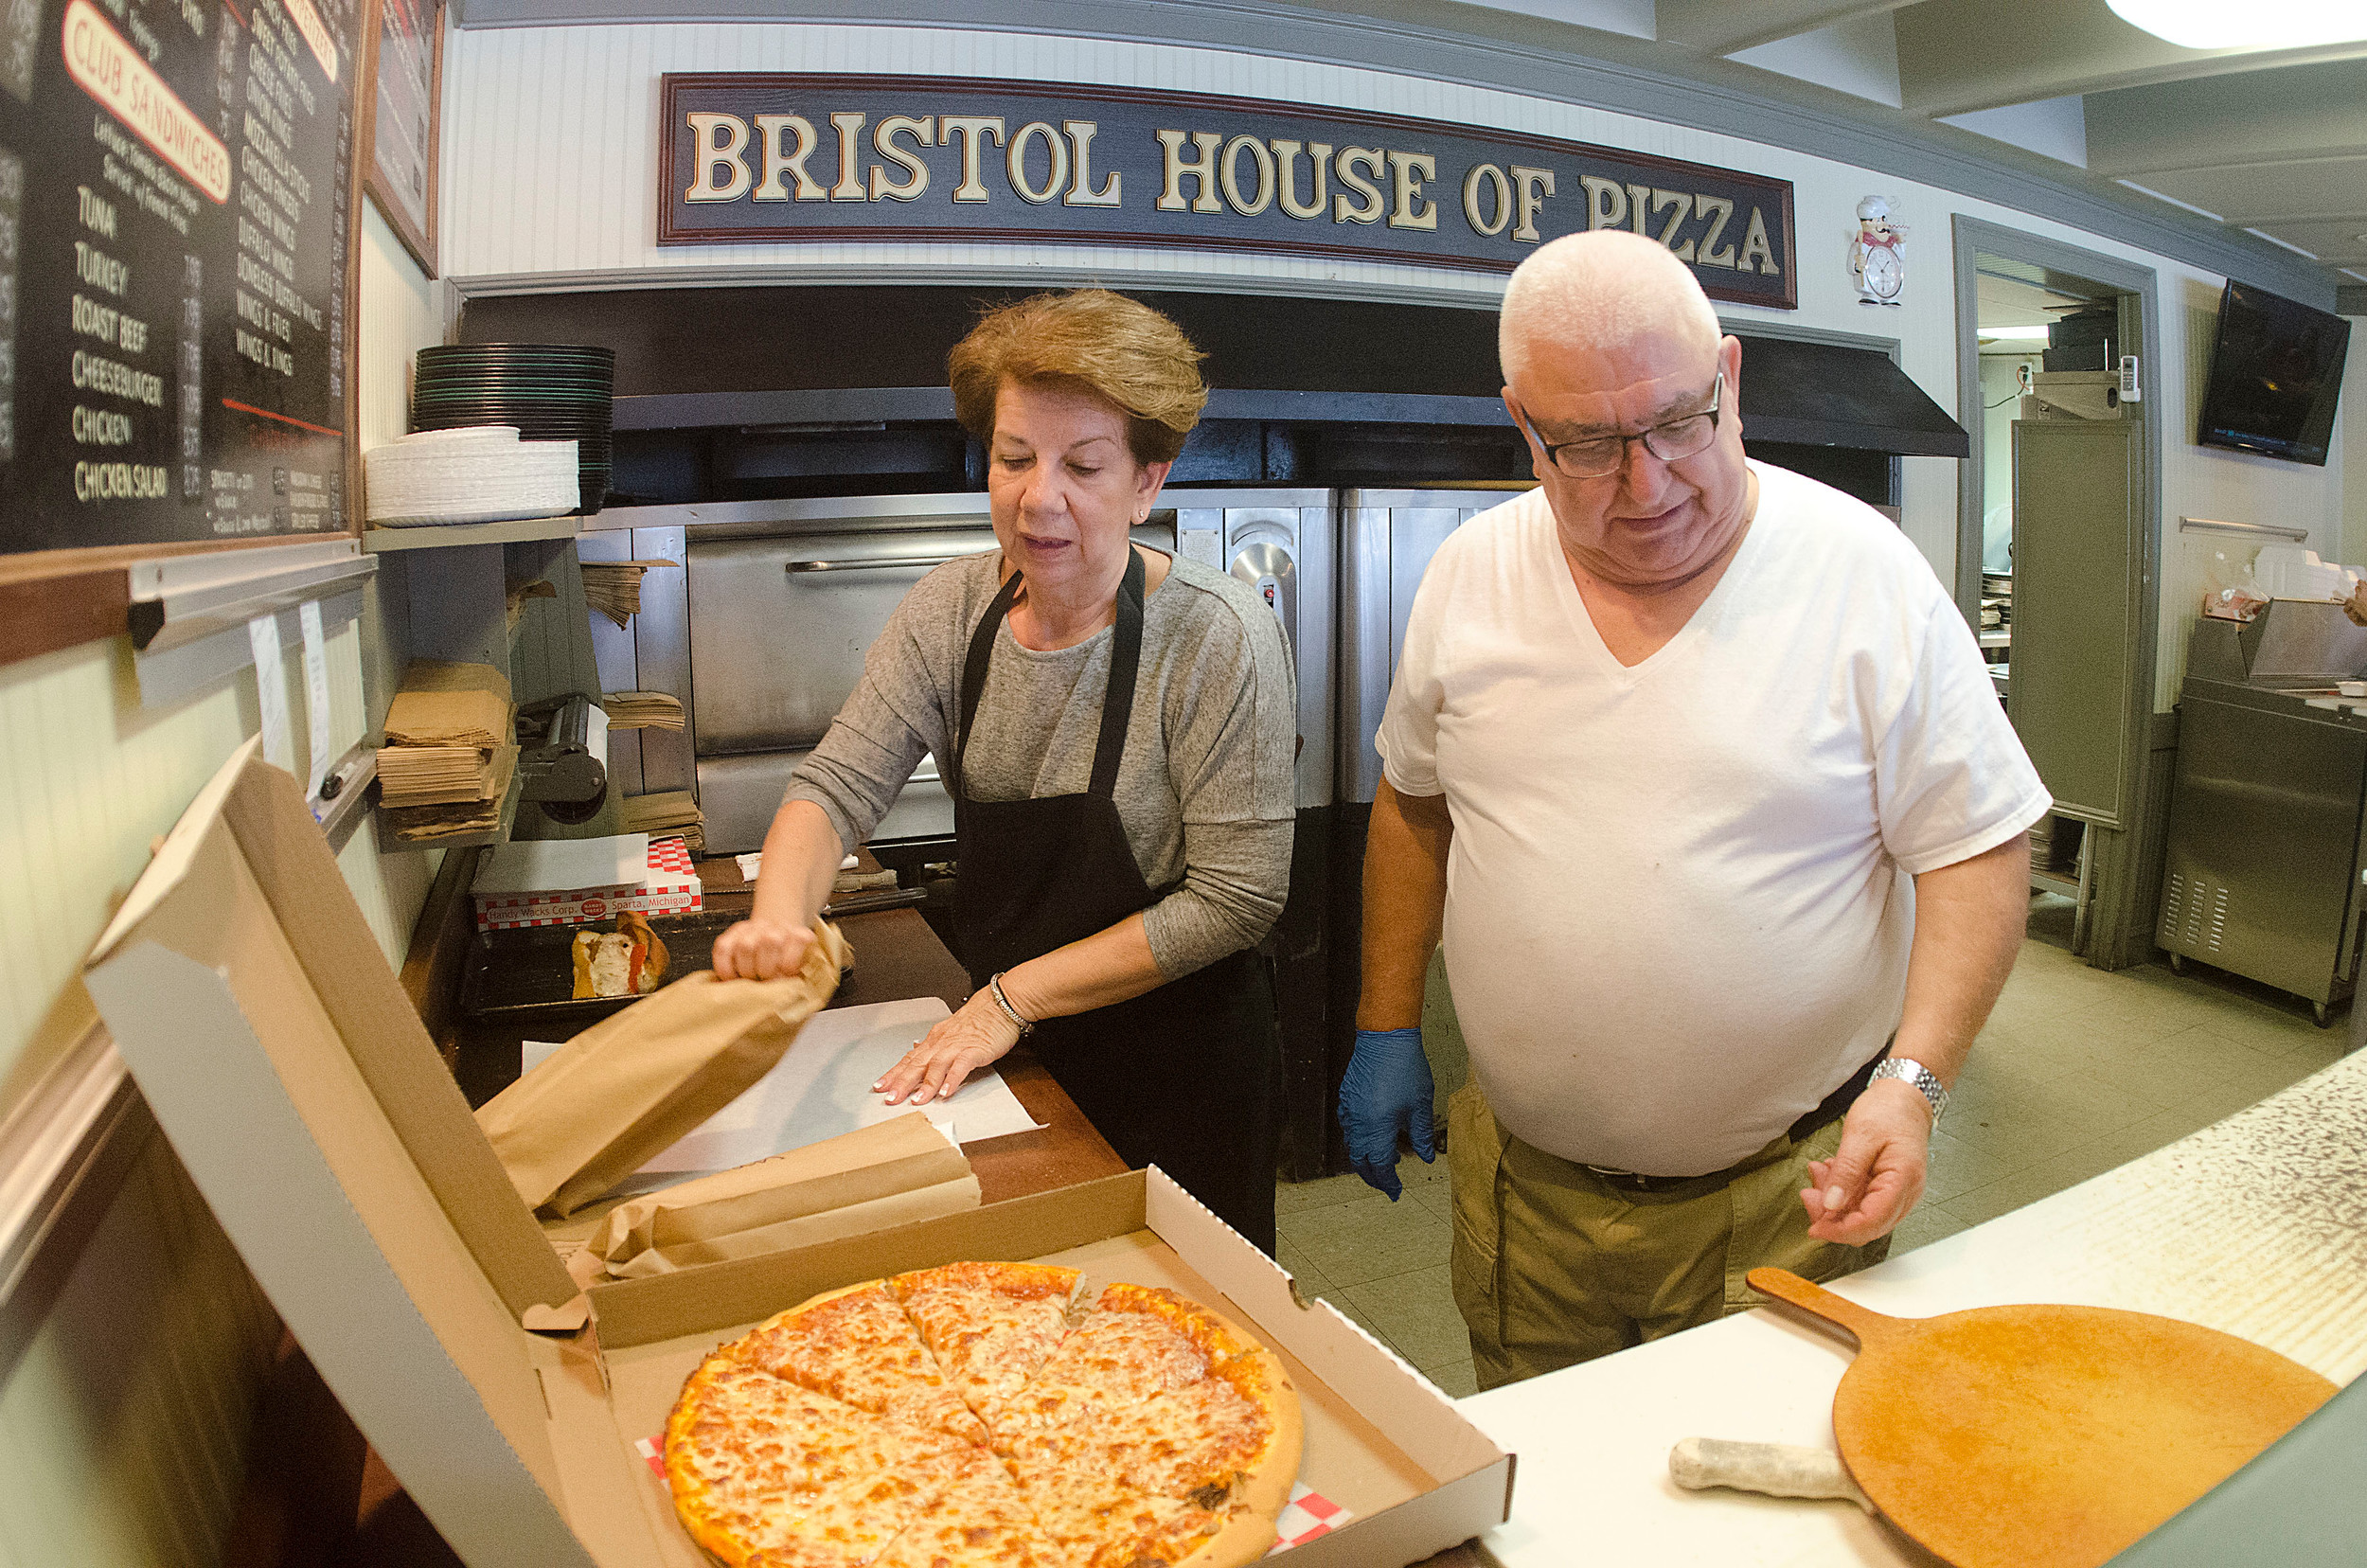 bristol house of pizza hours